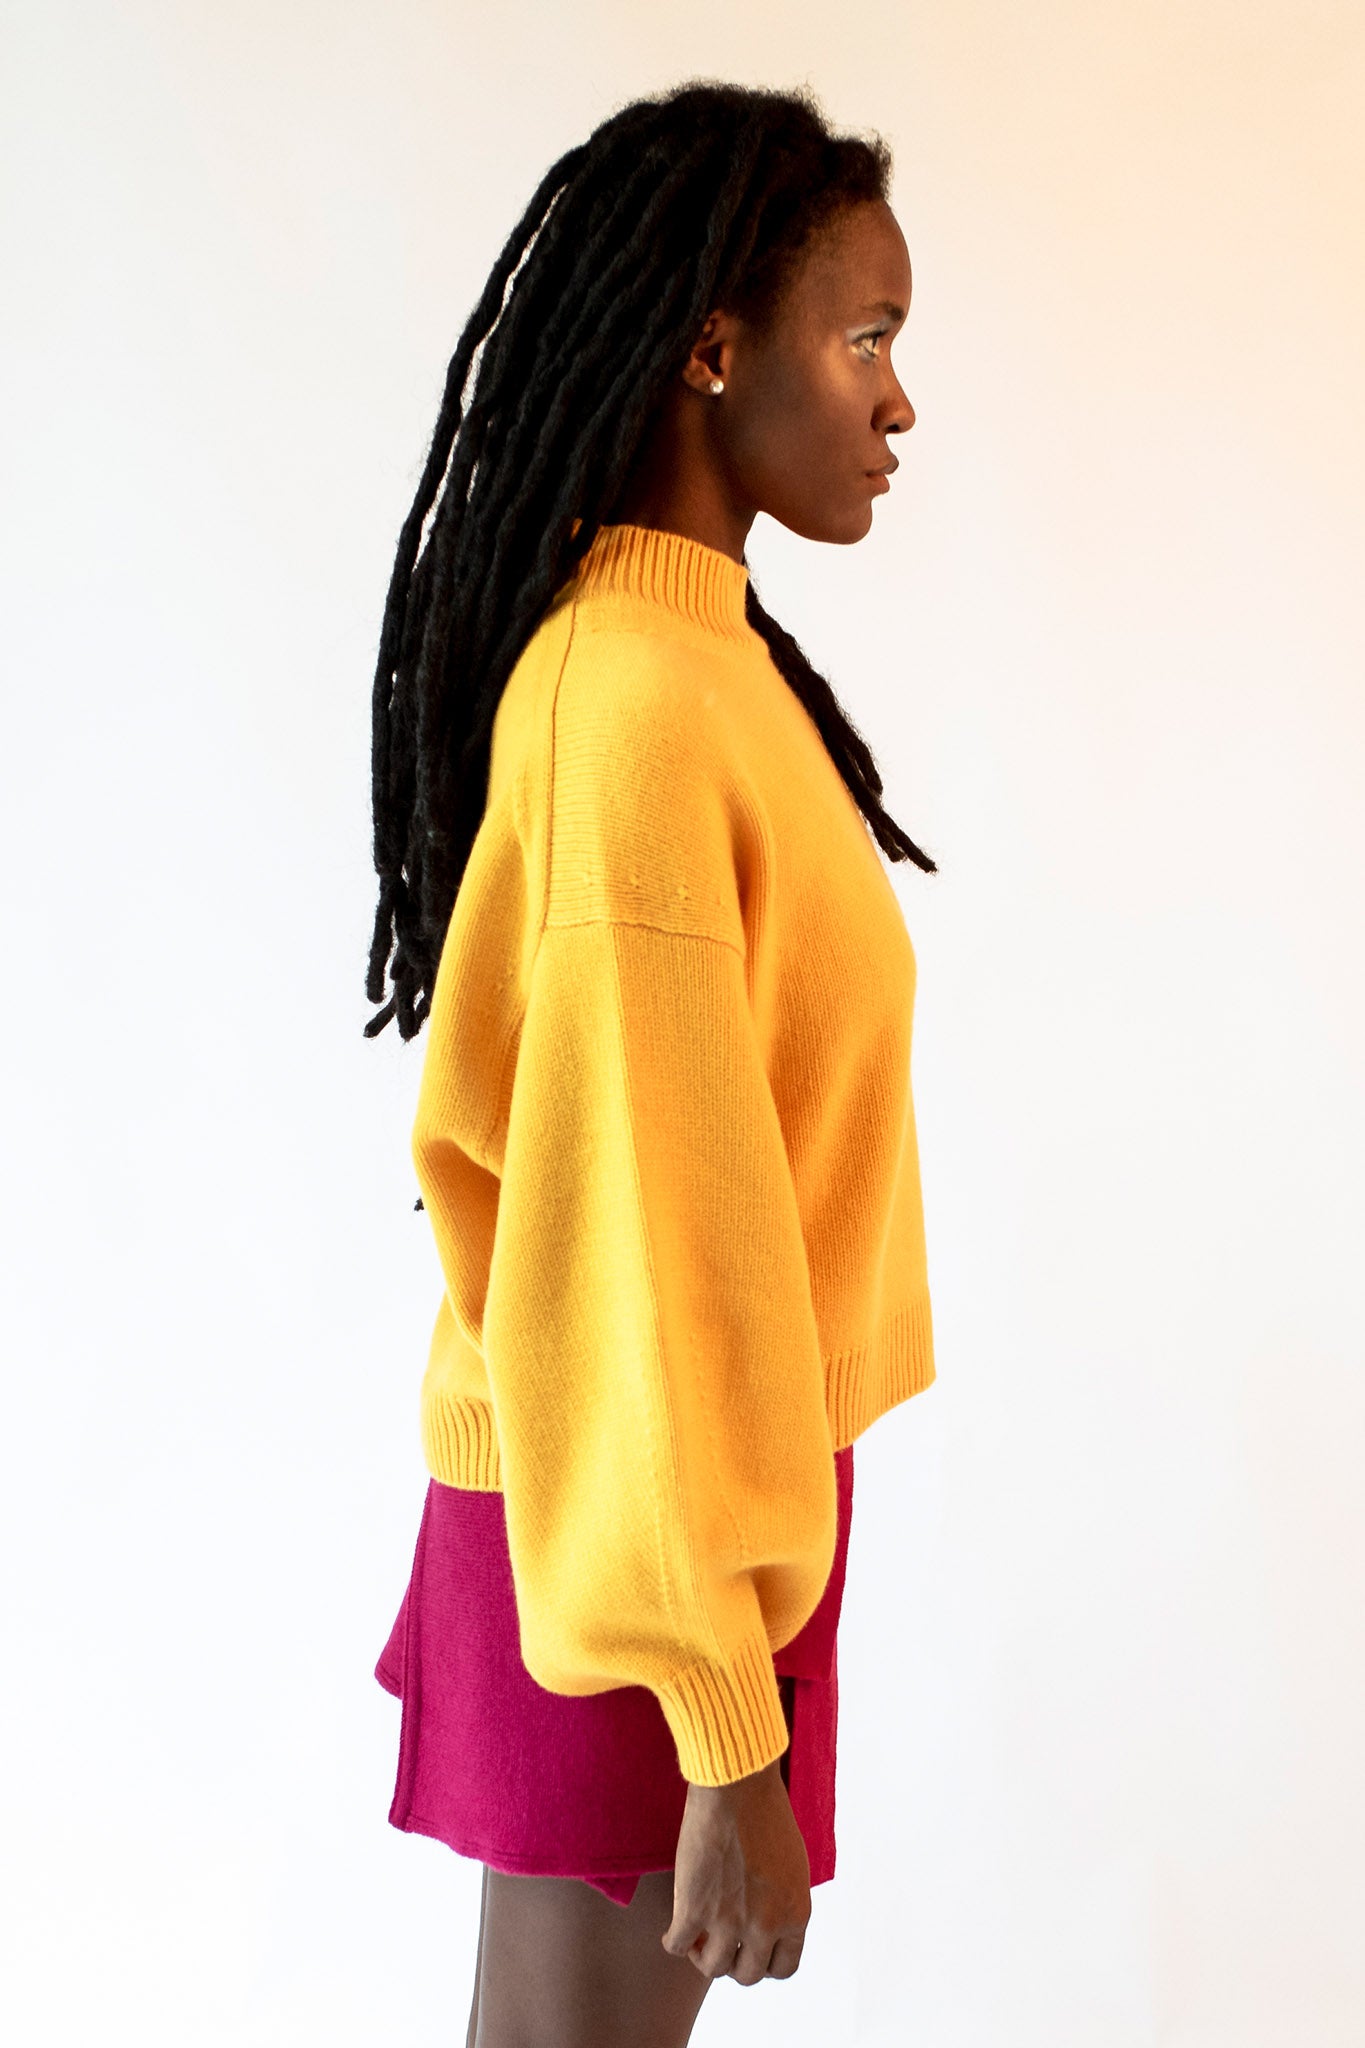 Yellow turtleneck sweater with Isabella jewel buttons